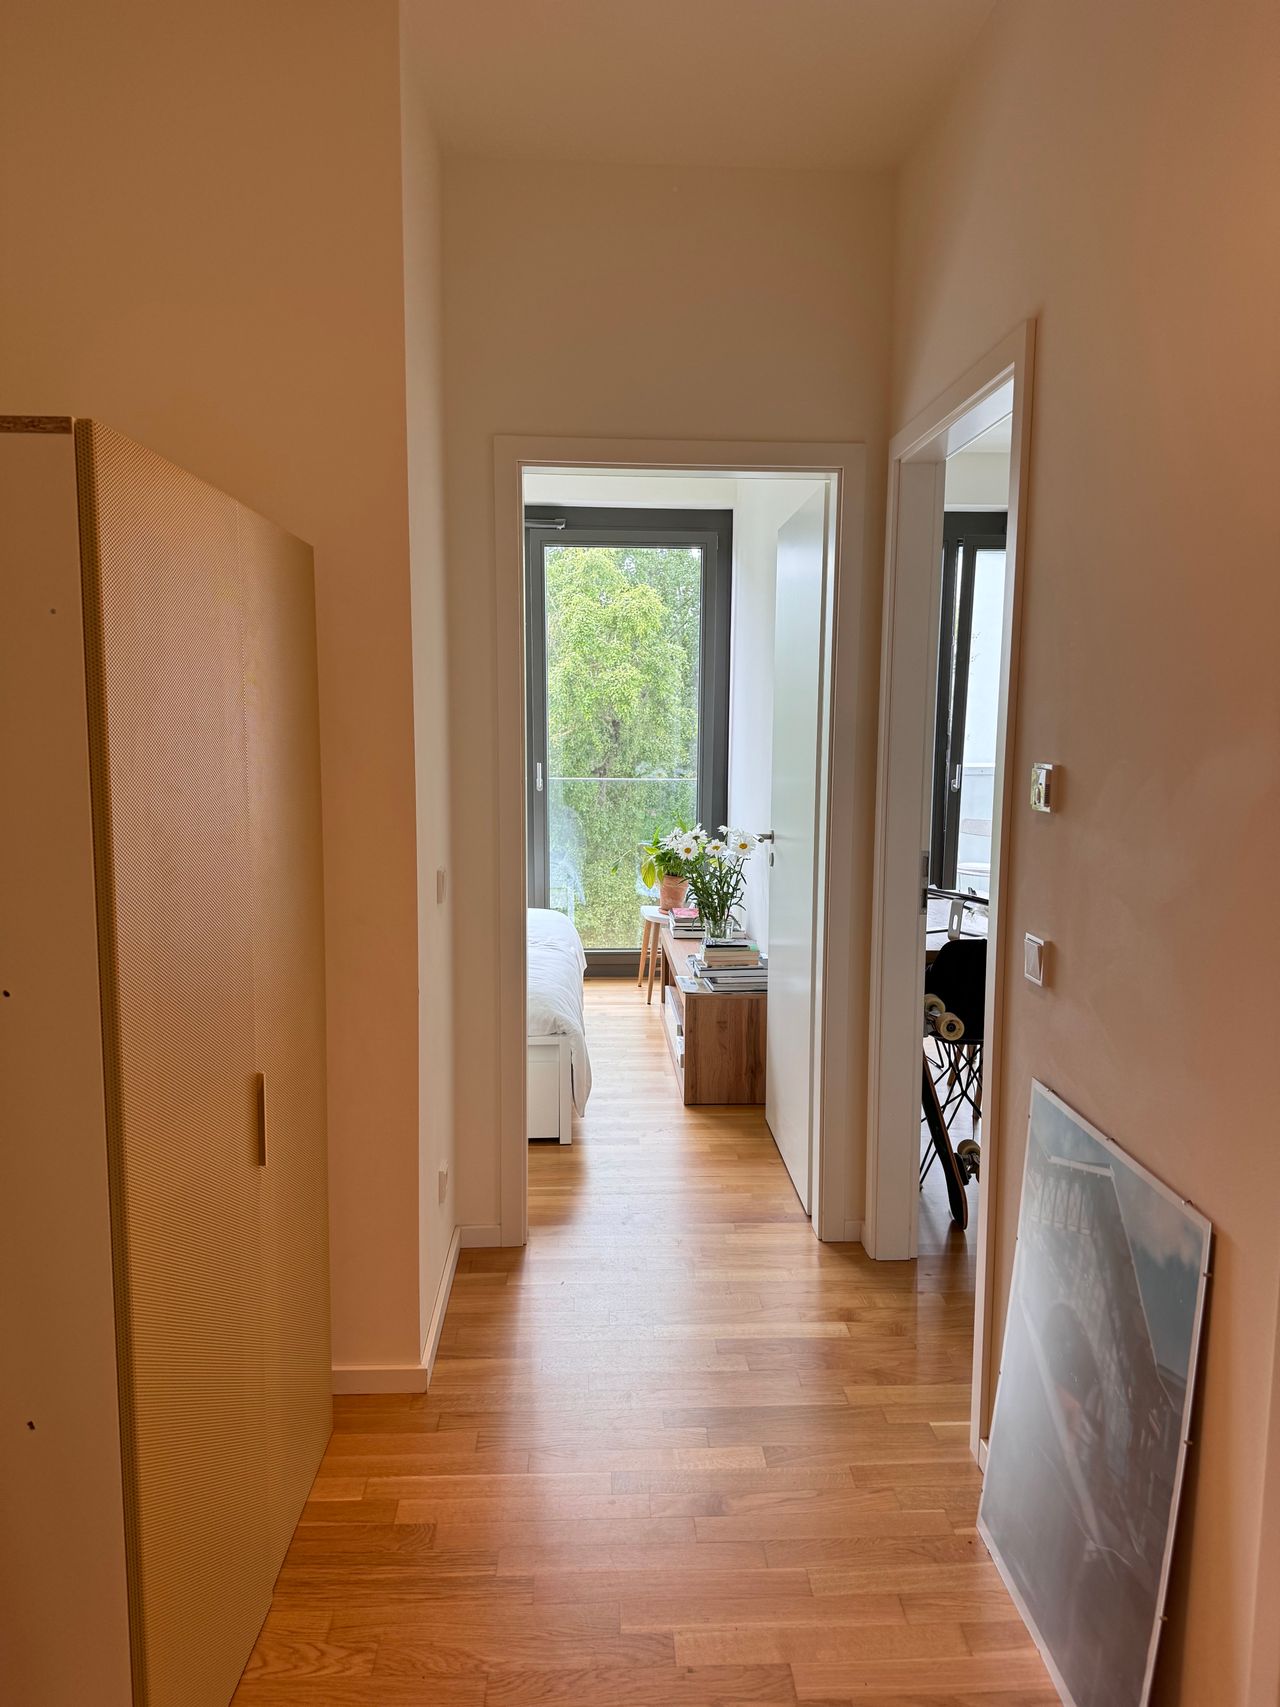 A Fully Furnished Flat at the Crossroads of Kreuzberg and Mitte! Available from July 5th